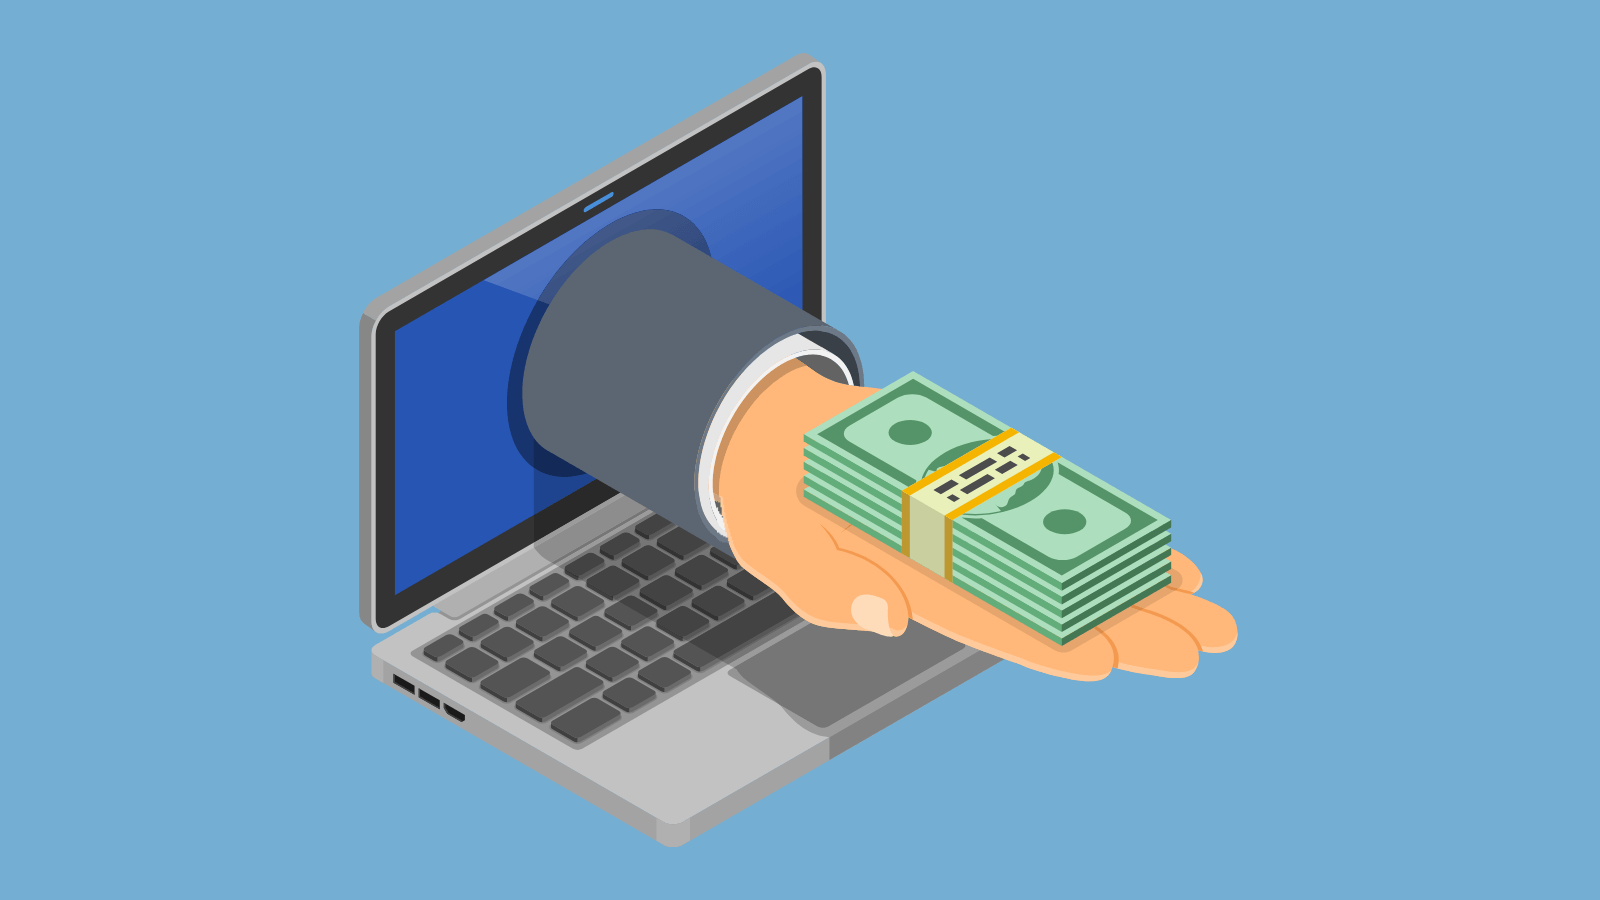 A hand with a stack of money reaching out of a laptop screen